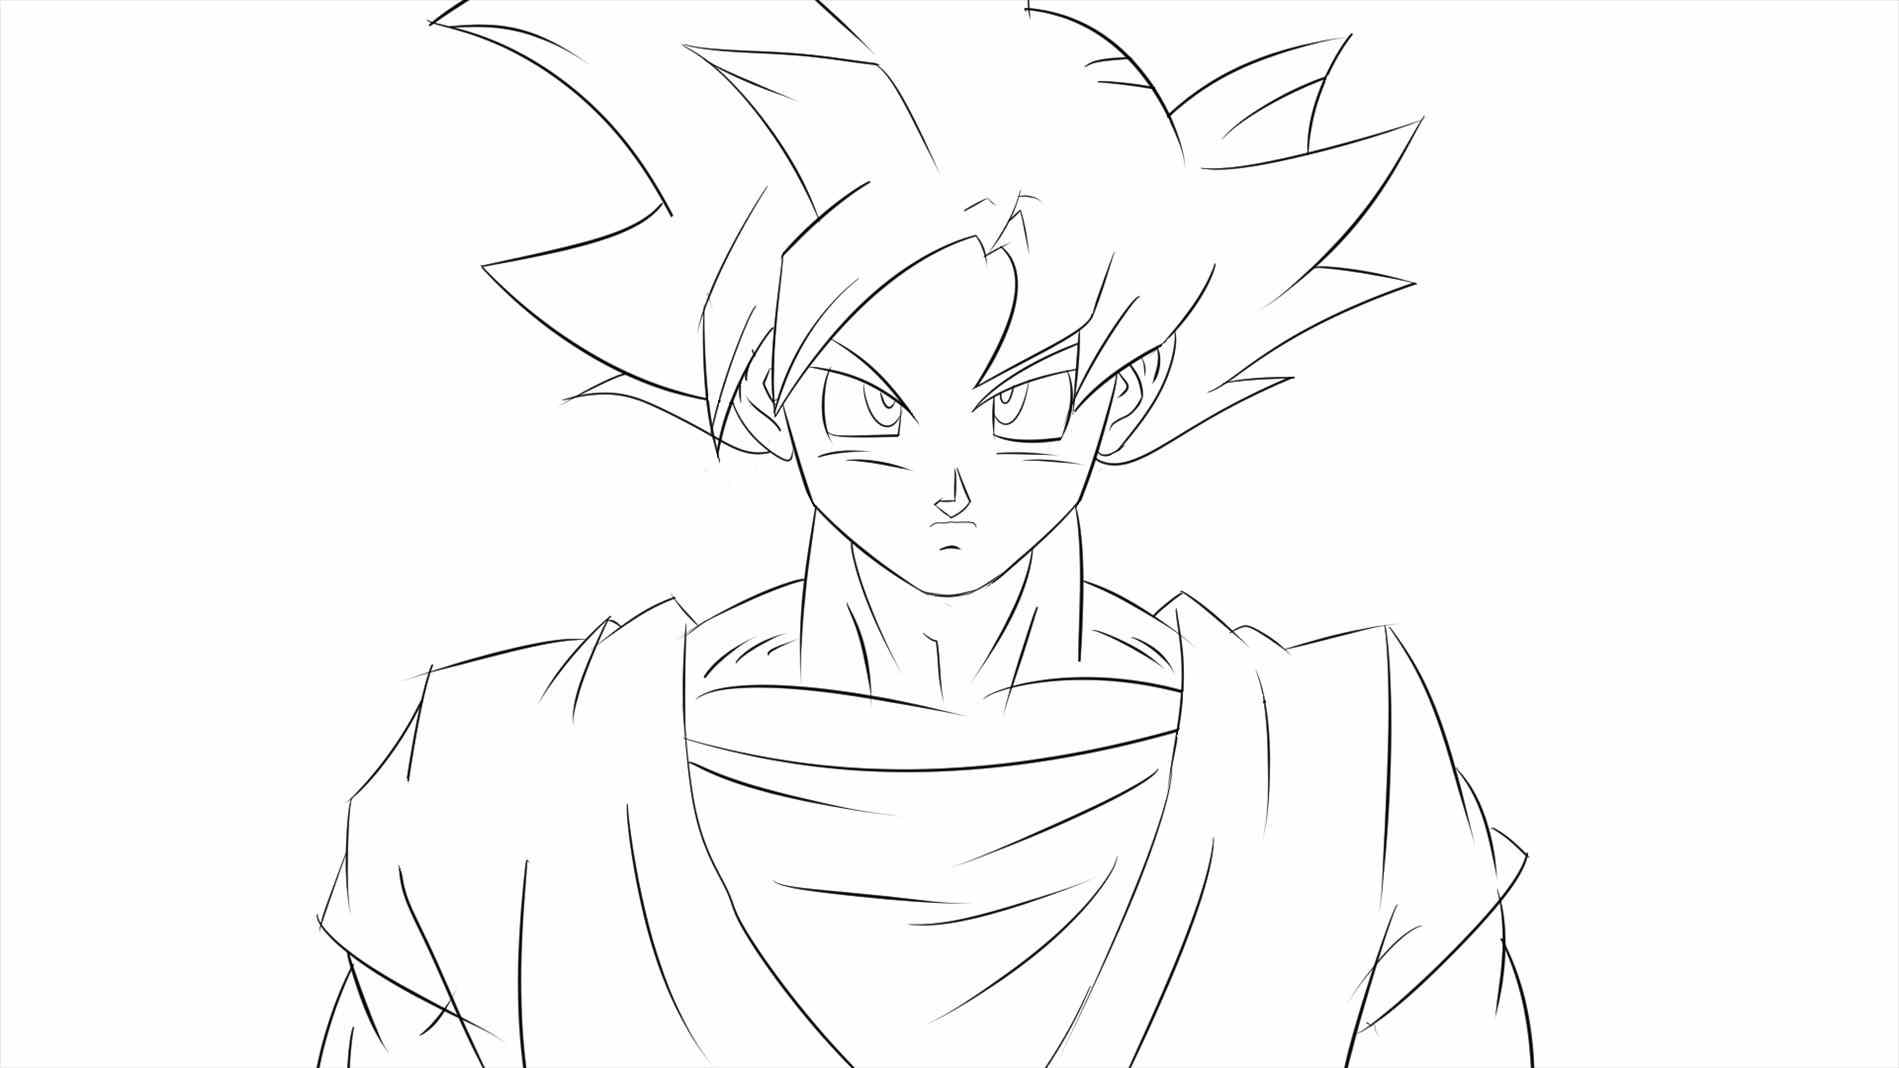 Goku Ssj Coloring Pages at GetColorings.com | Free printable colorings